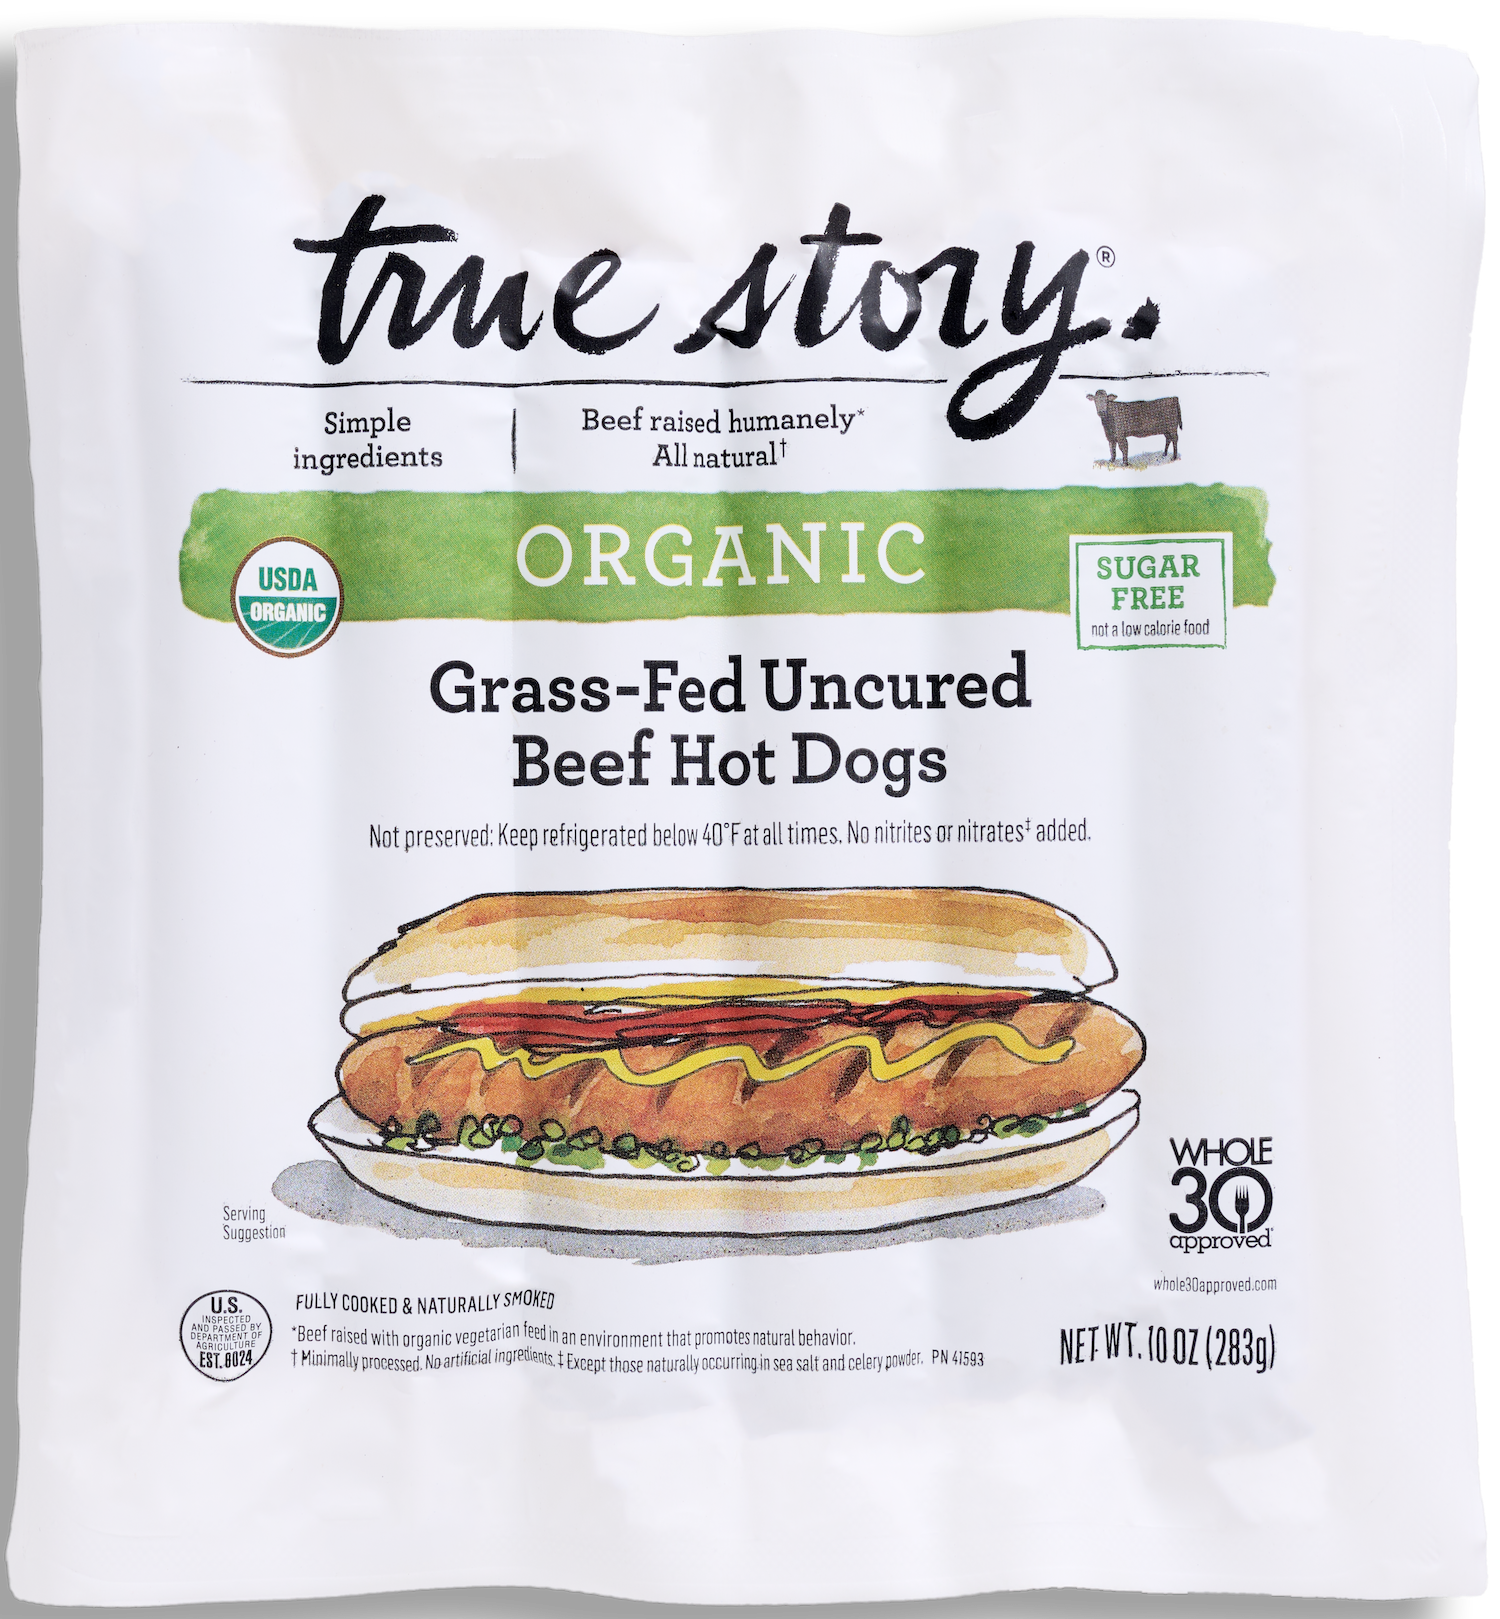 Organic Grass-Fed Uncured Beef Hot Dogs Packaging